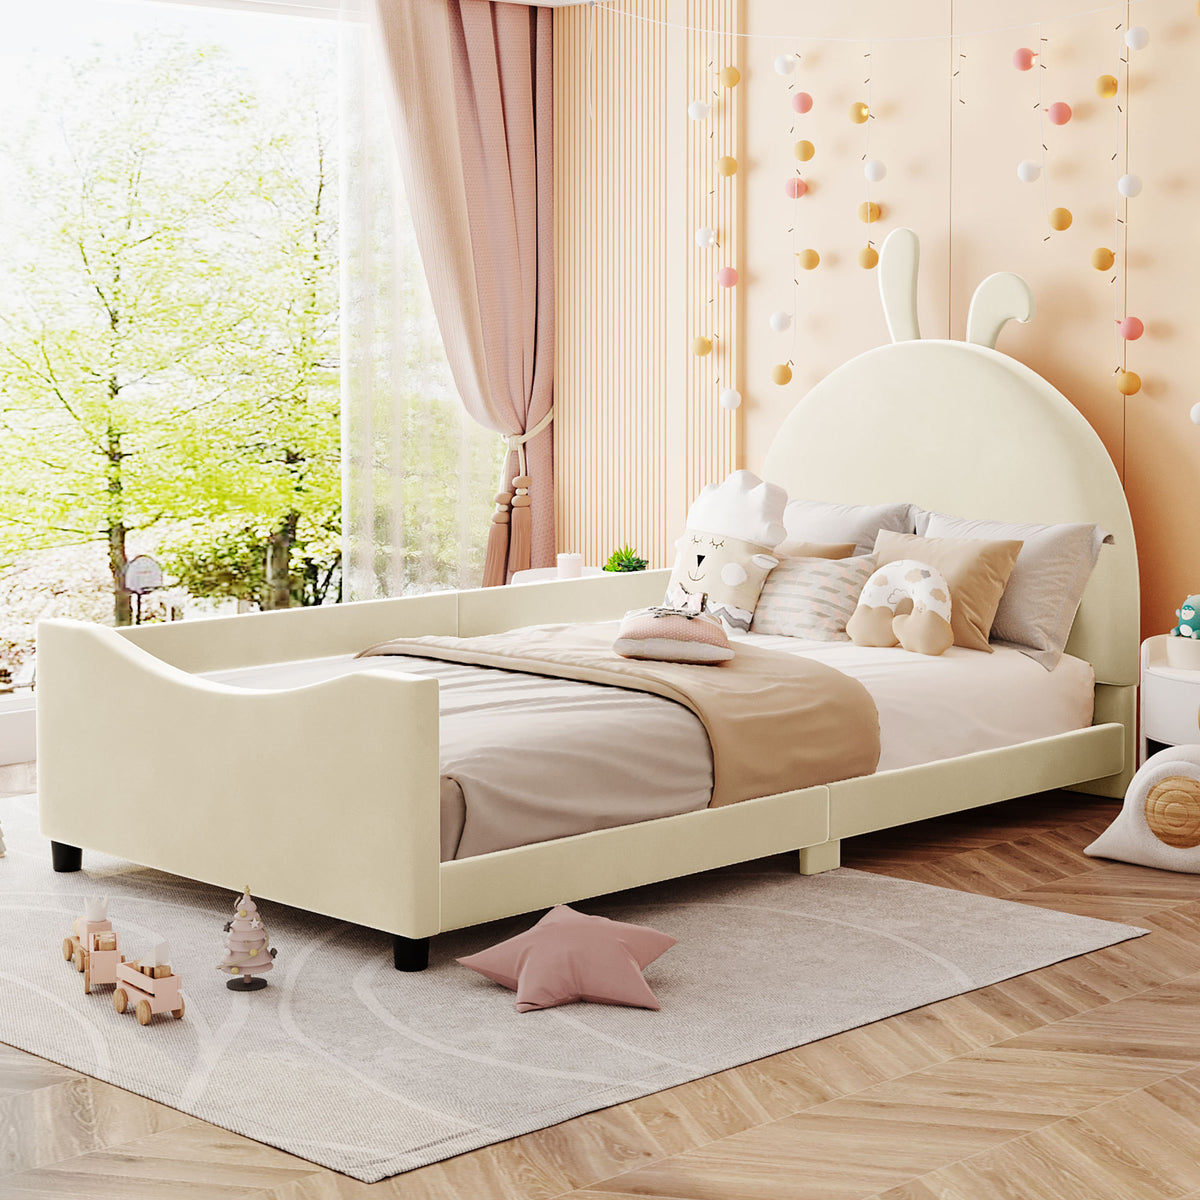 Twin Size Upholstered Daybed with Rabbit Ear Shaped Headboard - Beige